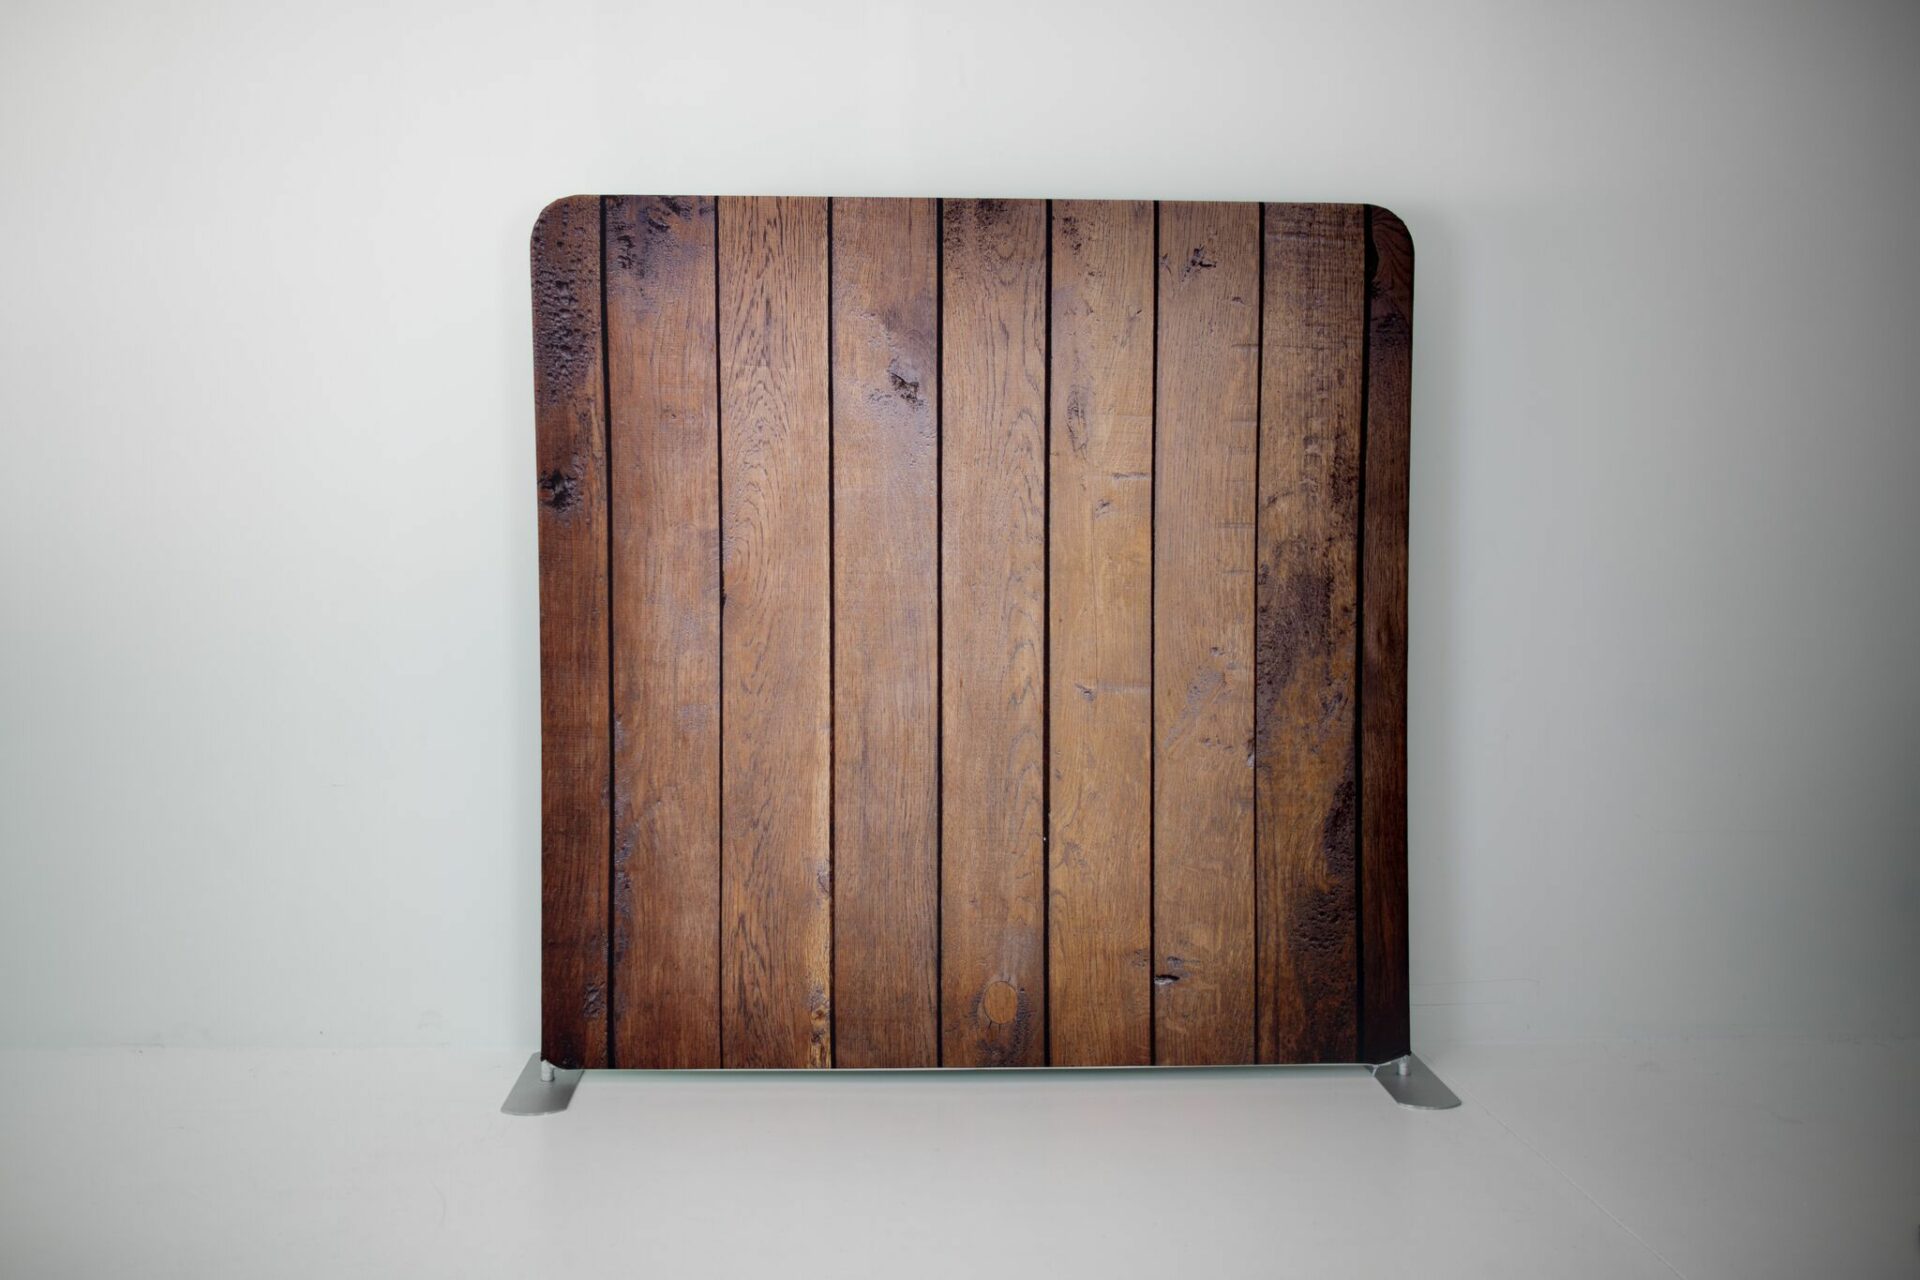 A wooden plank on a stand in front of a white wall.